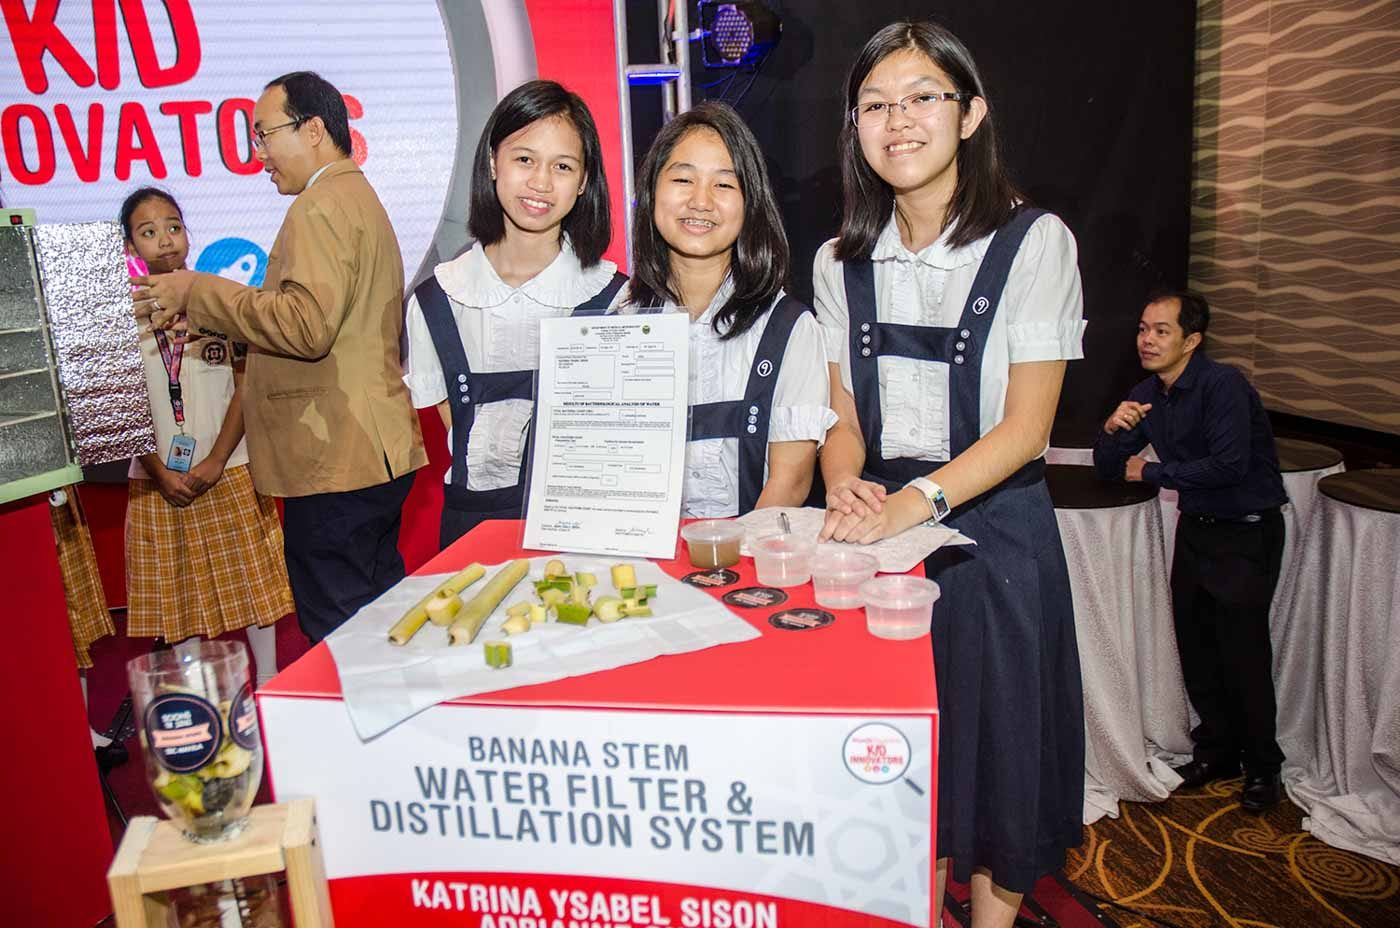 BANANA STEM WATER FILTER AND DISTILLATION SYSTEM. This innovation by Katrina Ysabel C. Sison, Adrianne A. Ong, and Andrea Samantha V. Estrella from St. Scholasticaâs College, Manila aims to help far-flung and disaster-stricken communities by producing a technology that filters and distills water to make it suitable for drinking by using indigenous materials such as banana stems. Photo by Rappler/Rob Reyes  